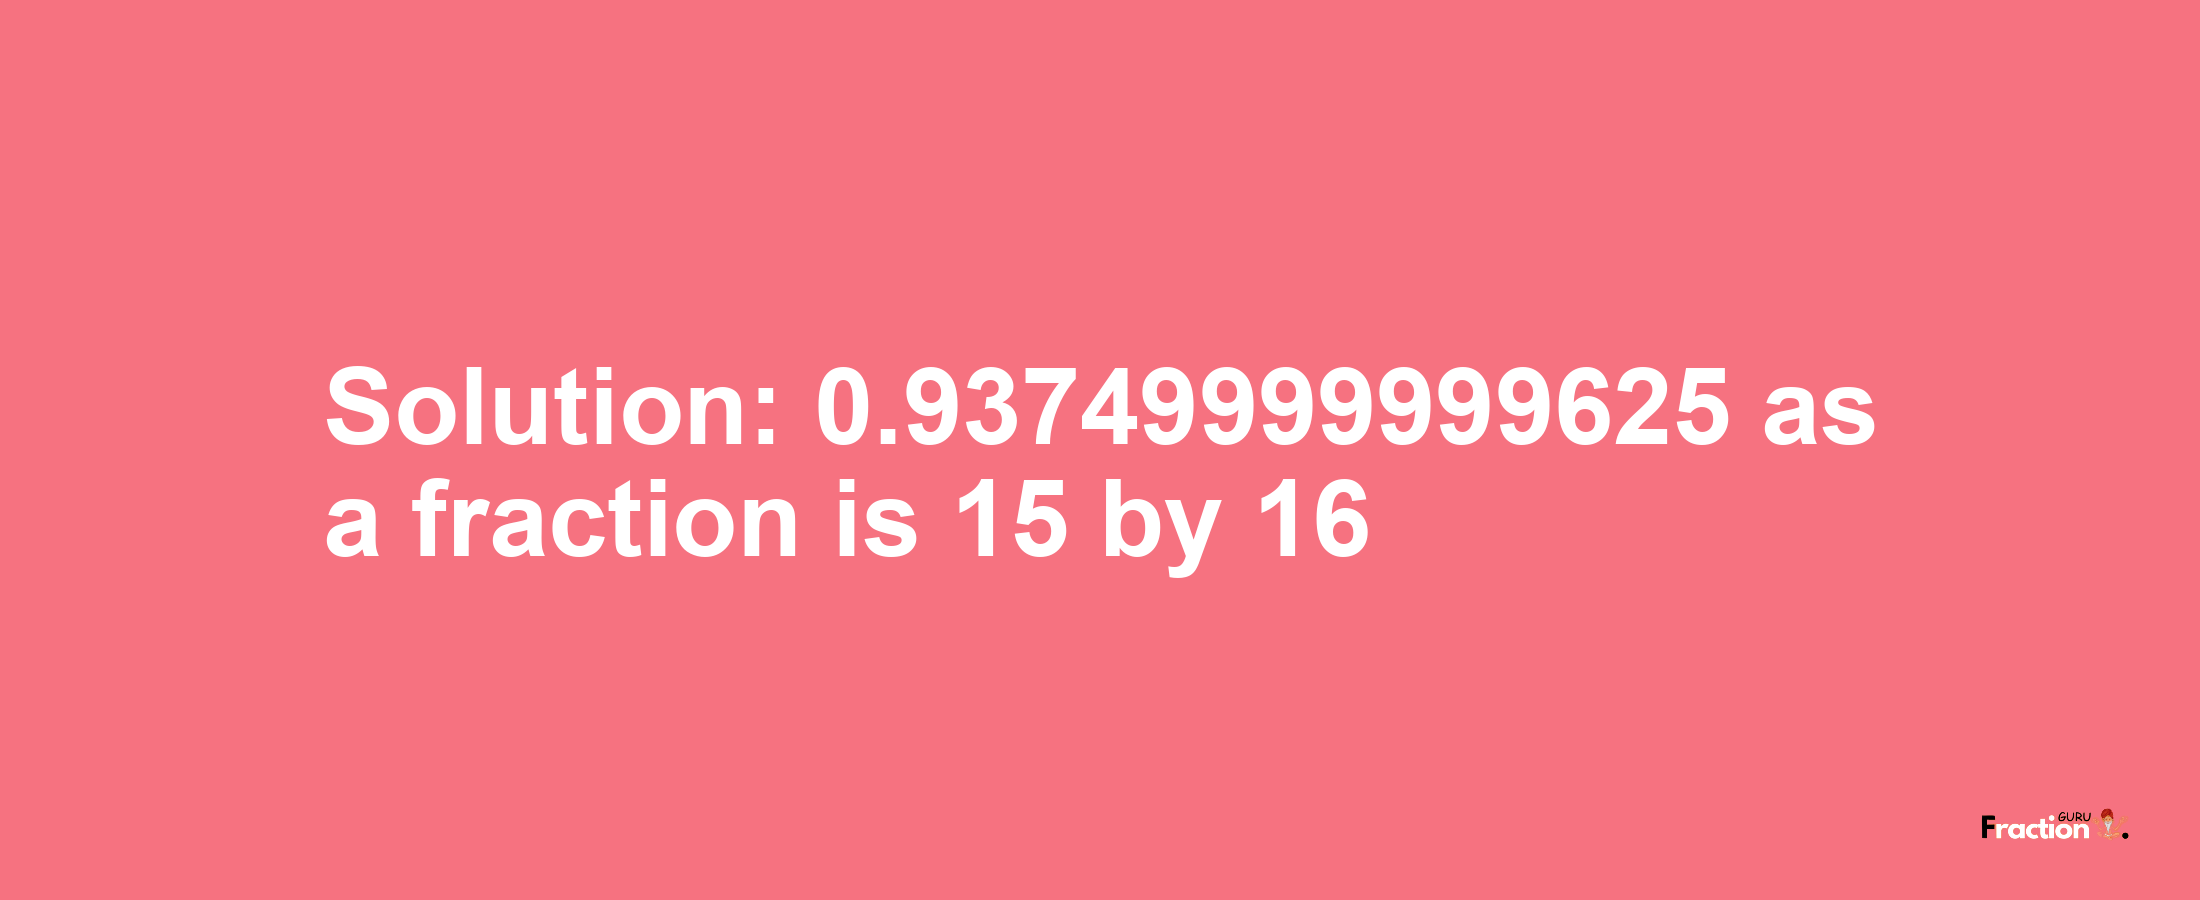 Solution:0.93749999999625 as a fraction is 15/16